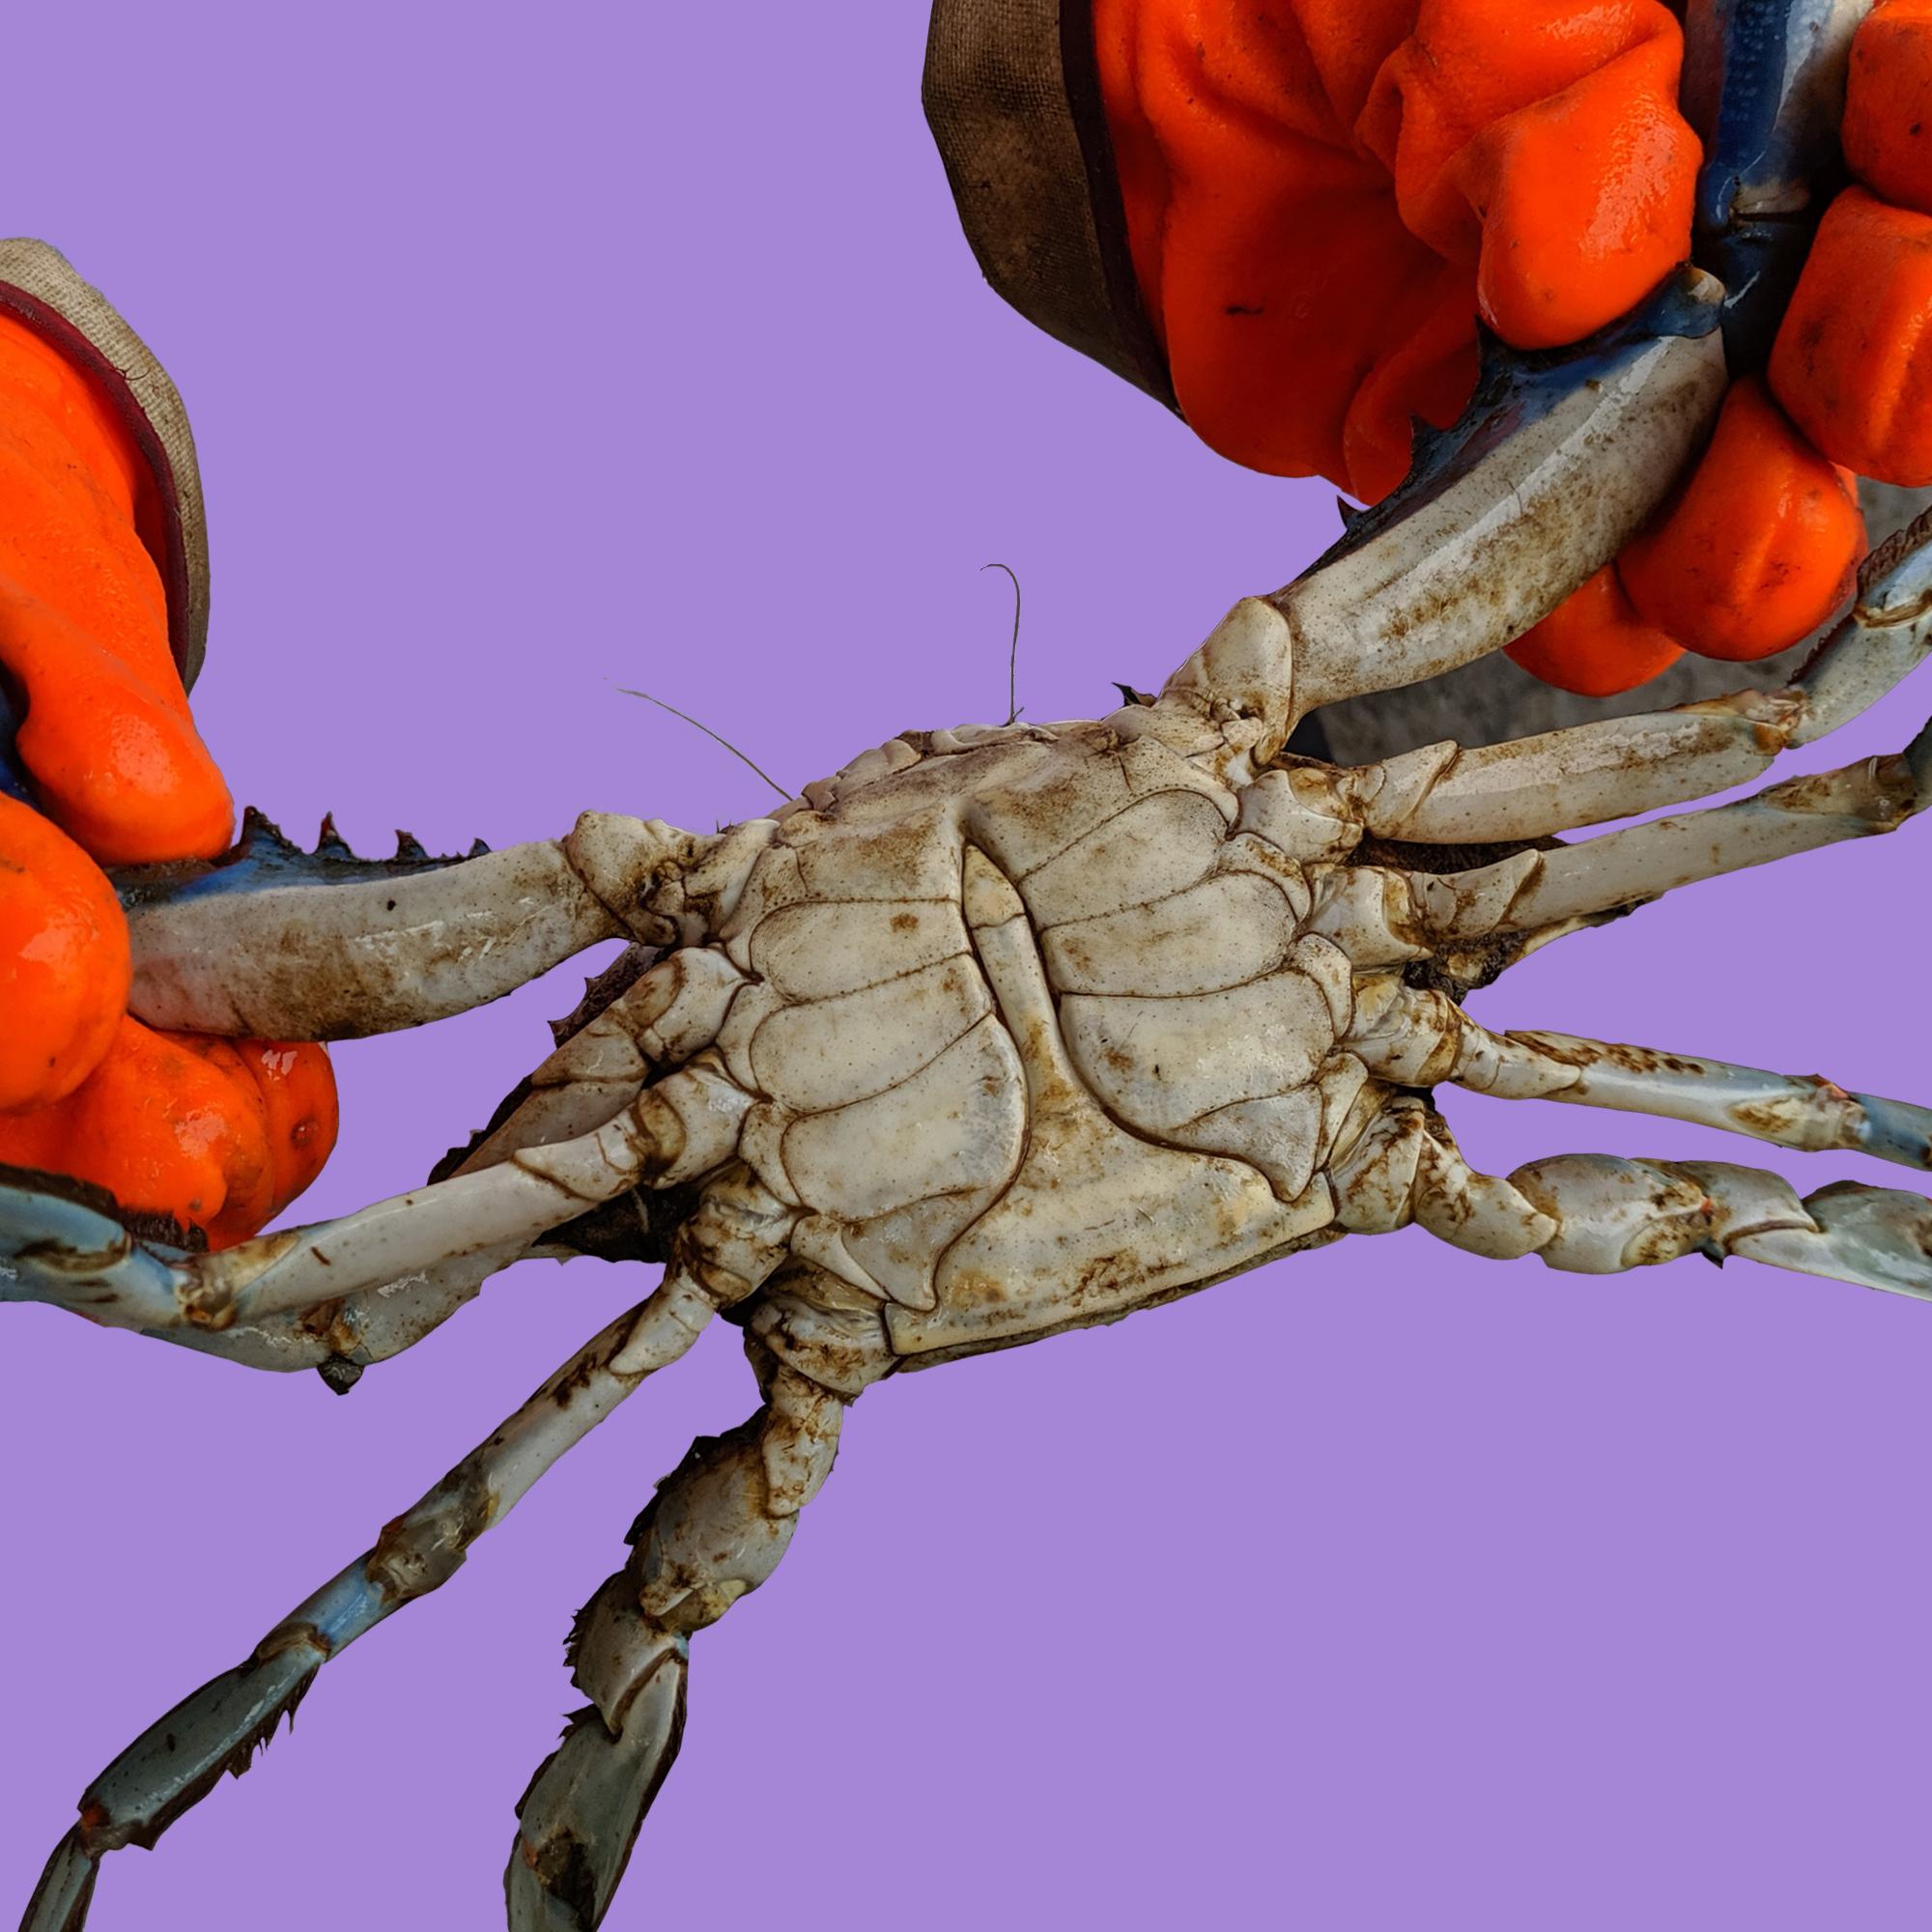 Thumbnail for "Maryland Blue Crabs".